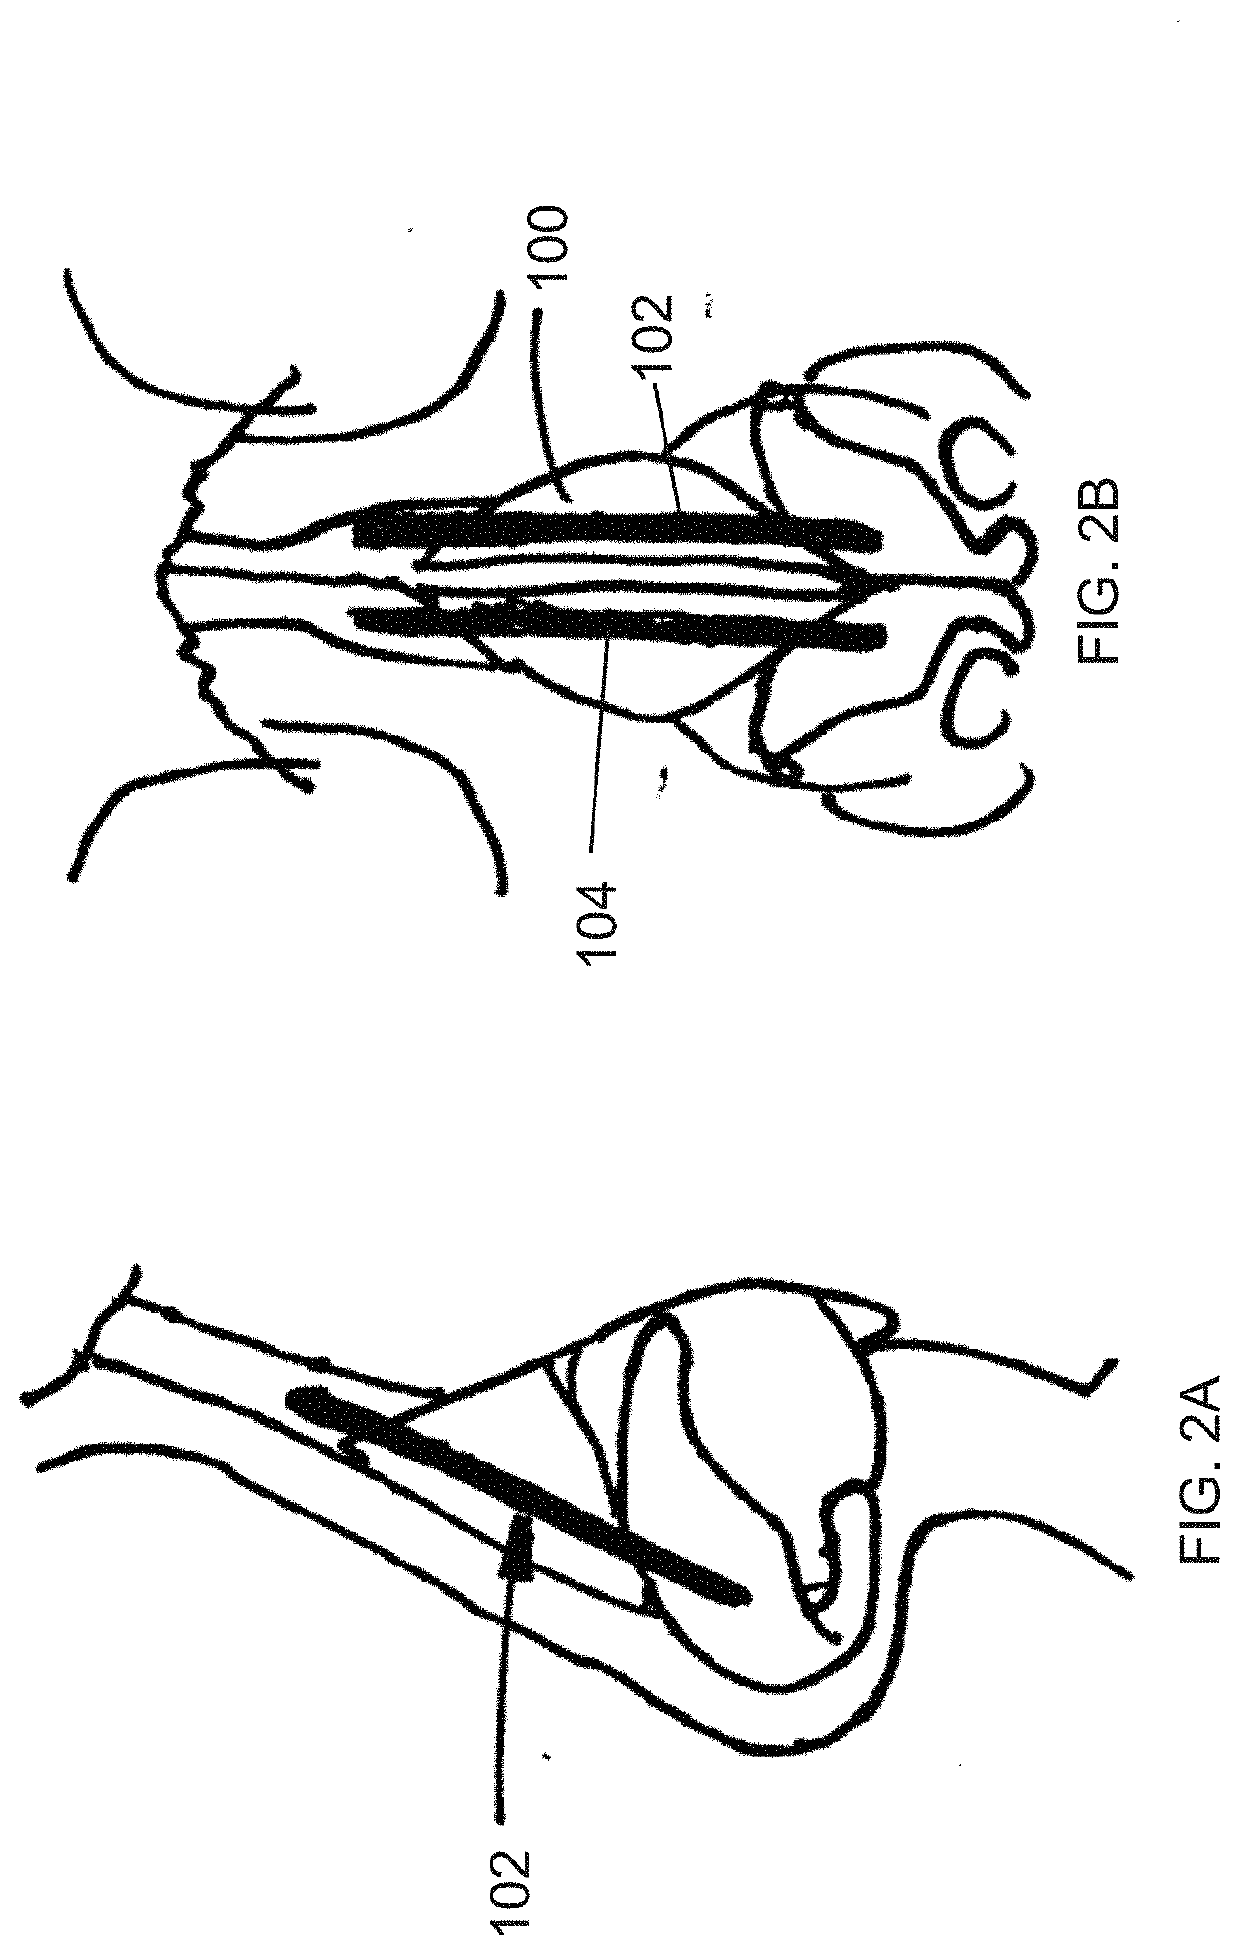 Systems and methods for nasal support